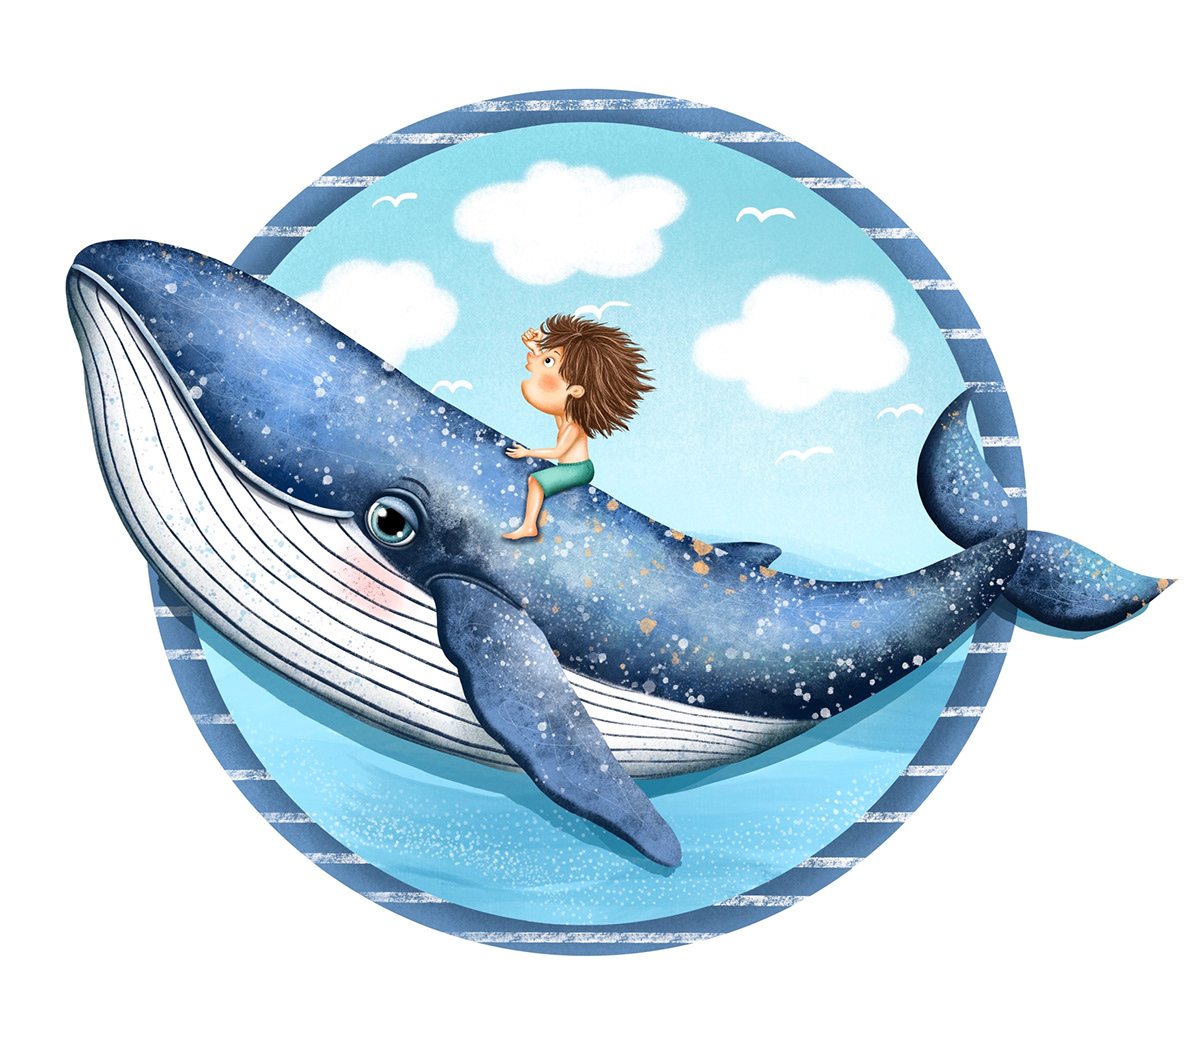 animals bluewhale Character design  children cute fish ILLUSTRATION  Ocean sea Whale